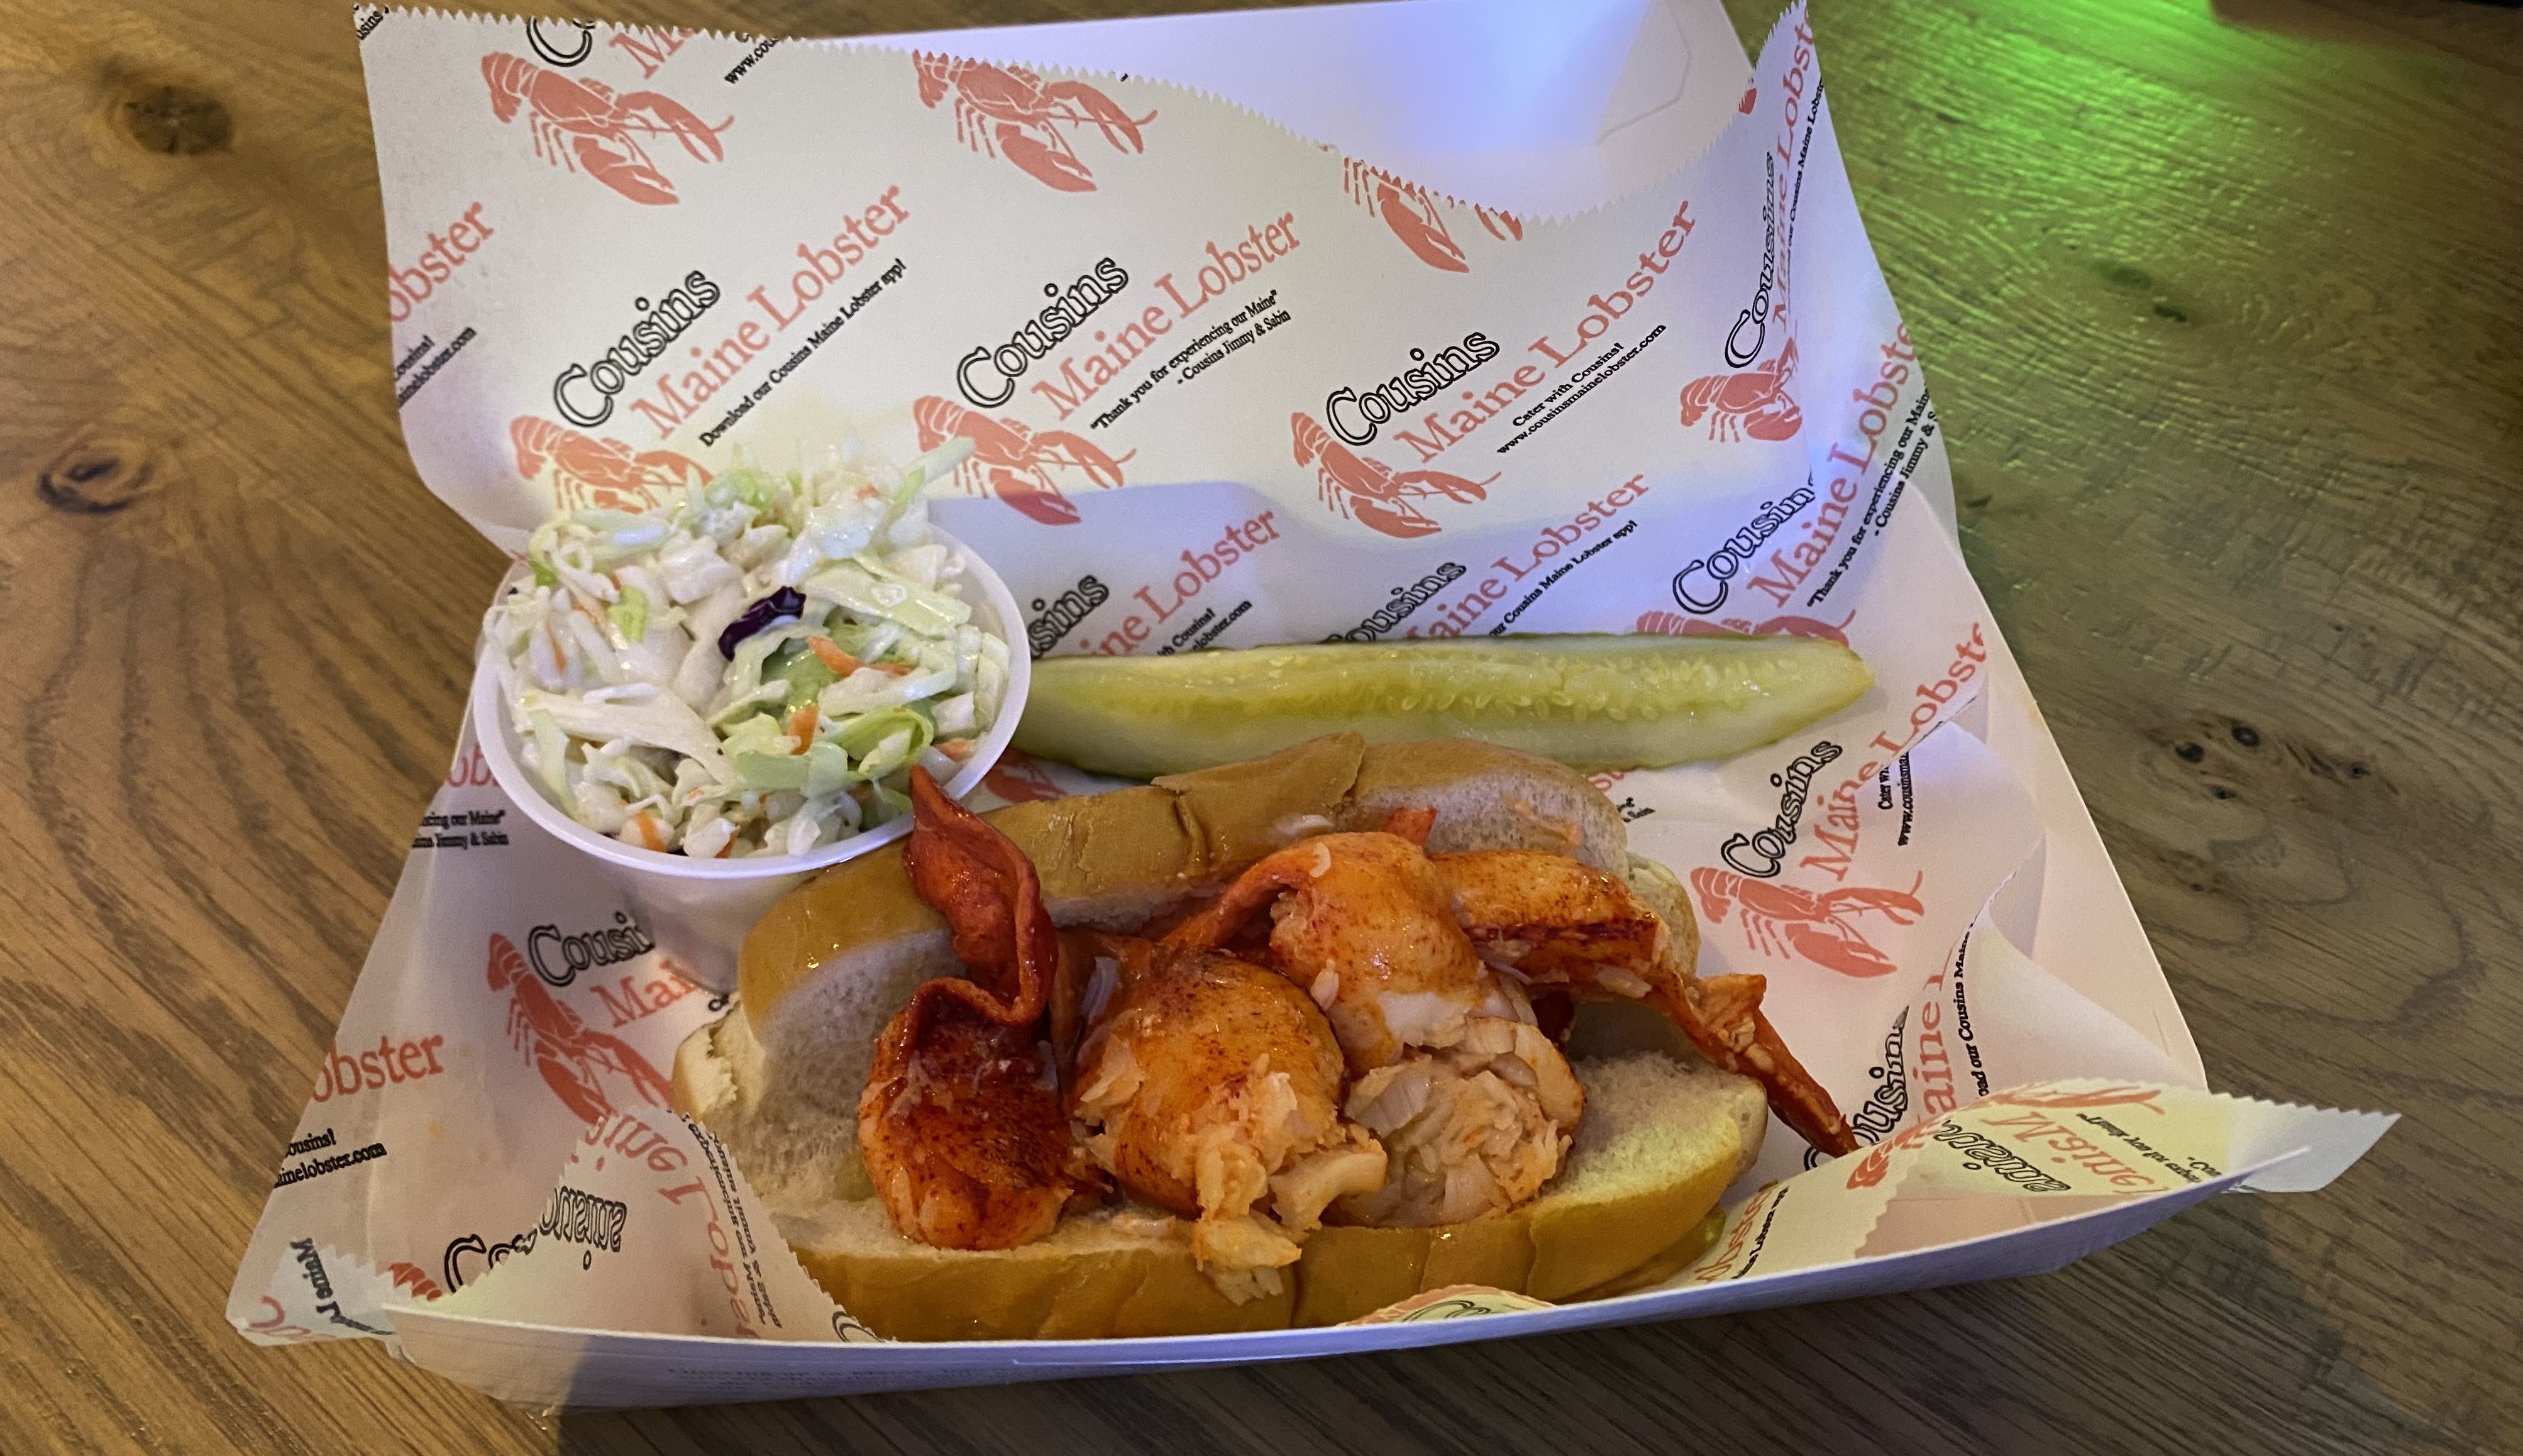 A lobster roll with coleslaw and a pickle spear